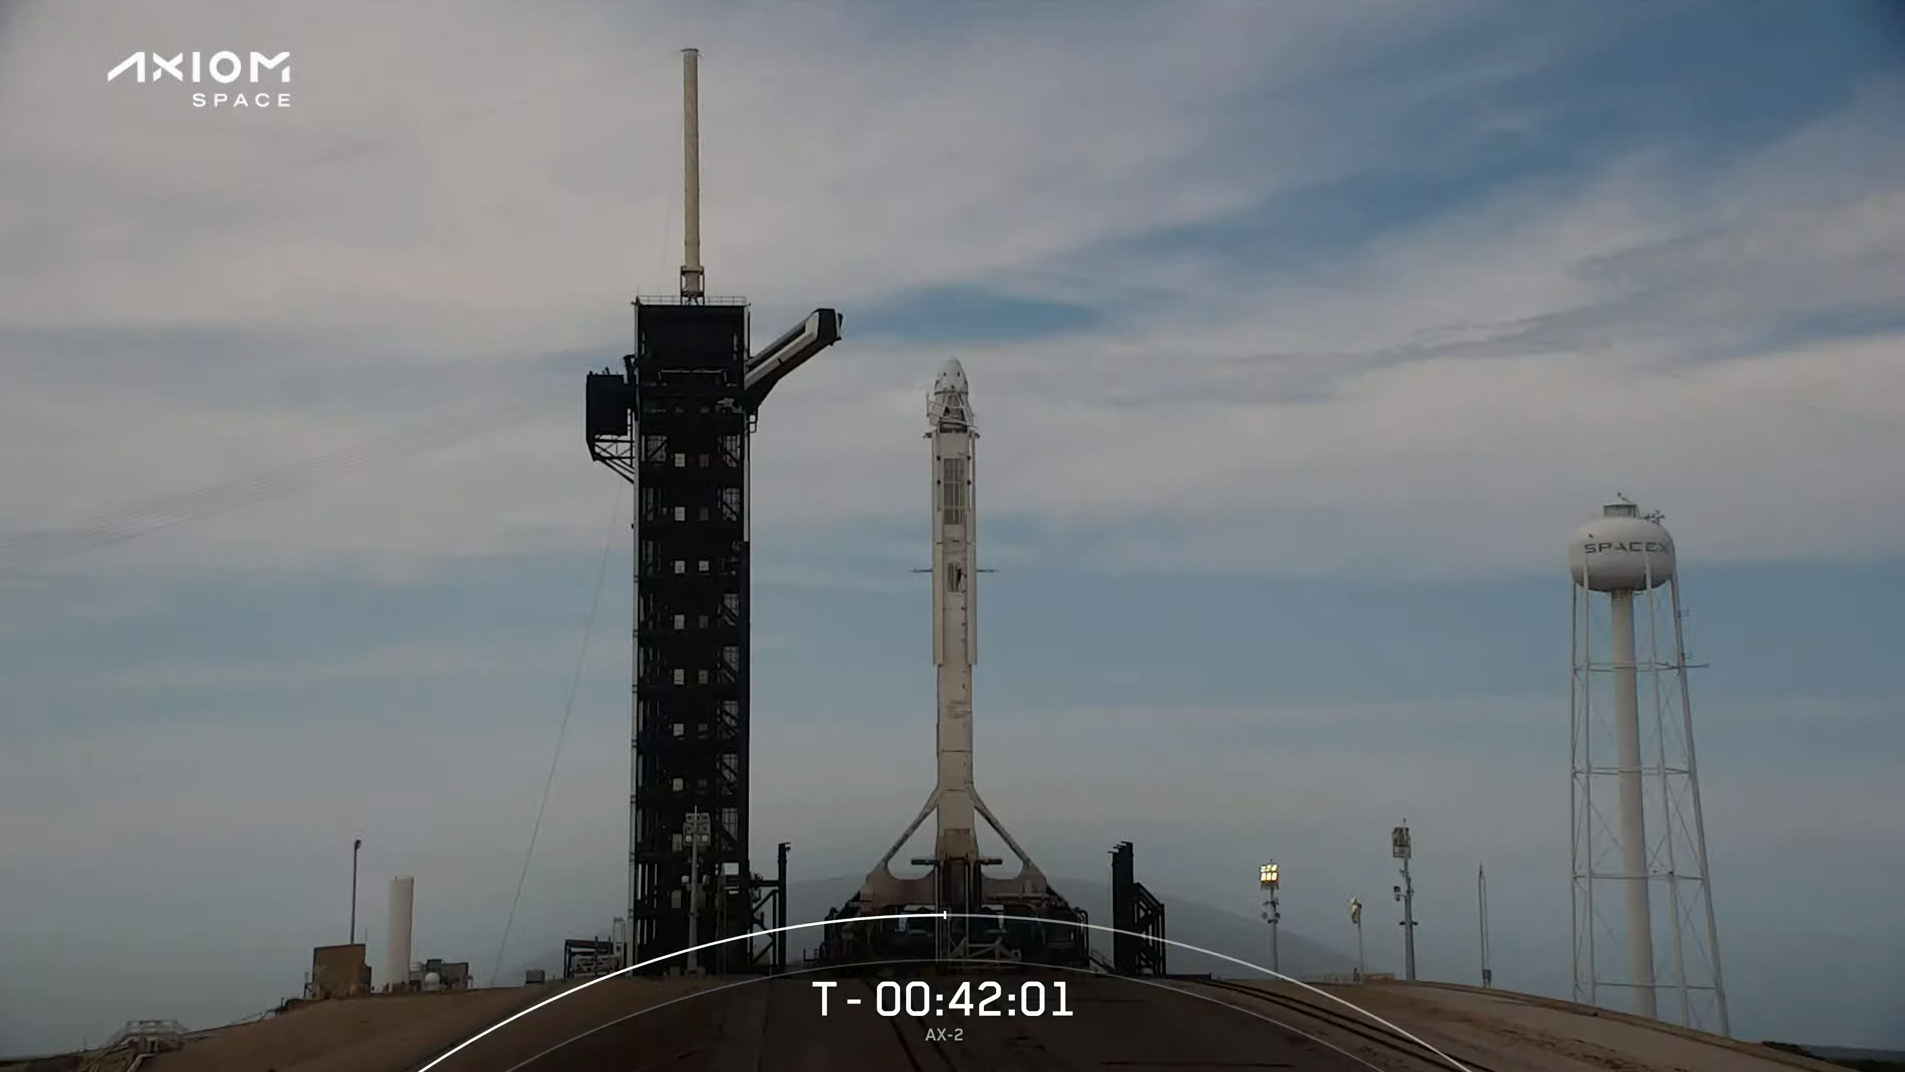 White SpaceX rocket on launch pad with crew access gantry retracted